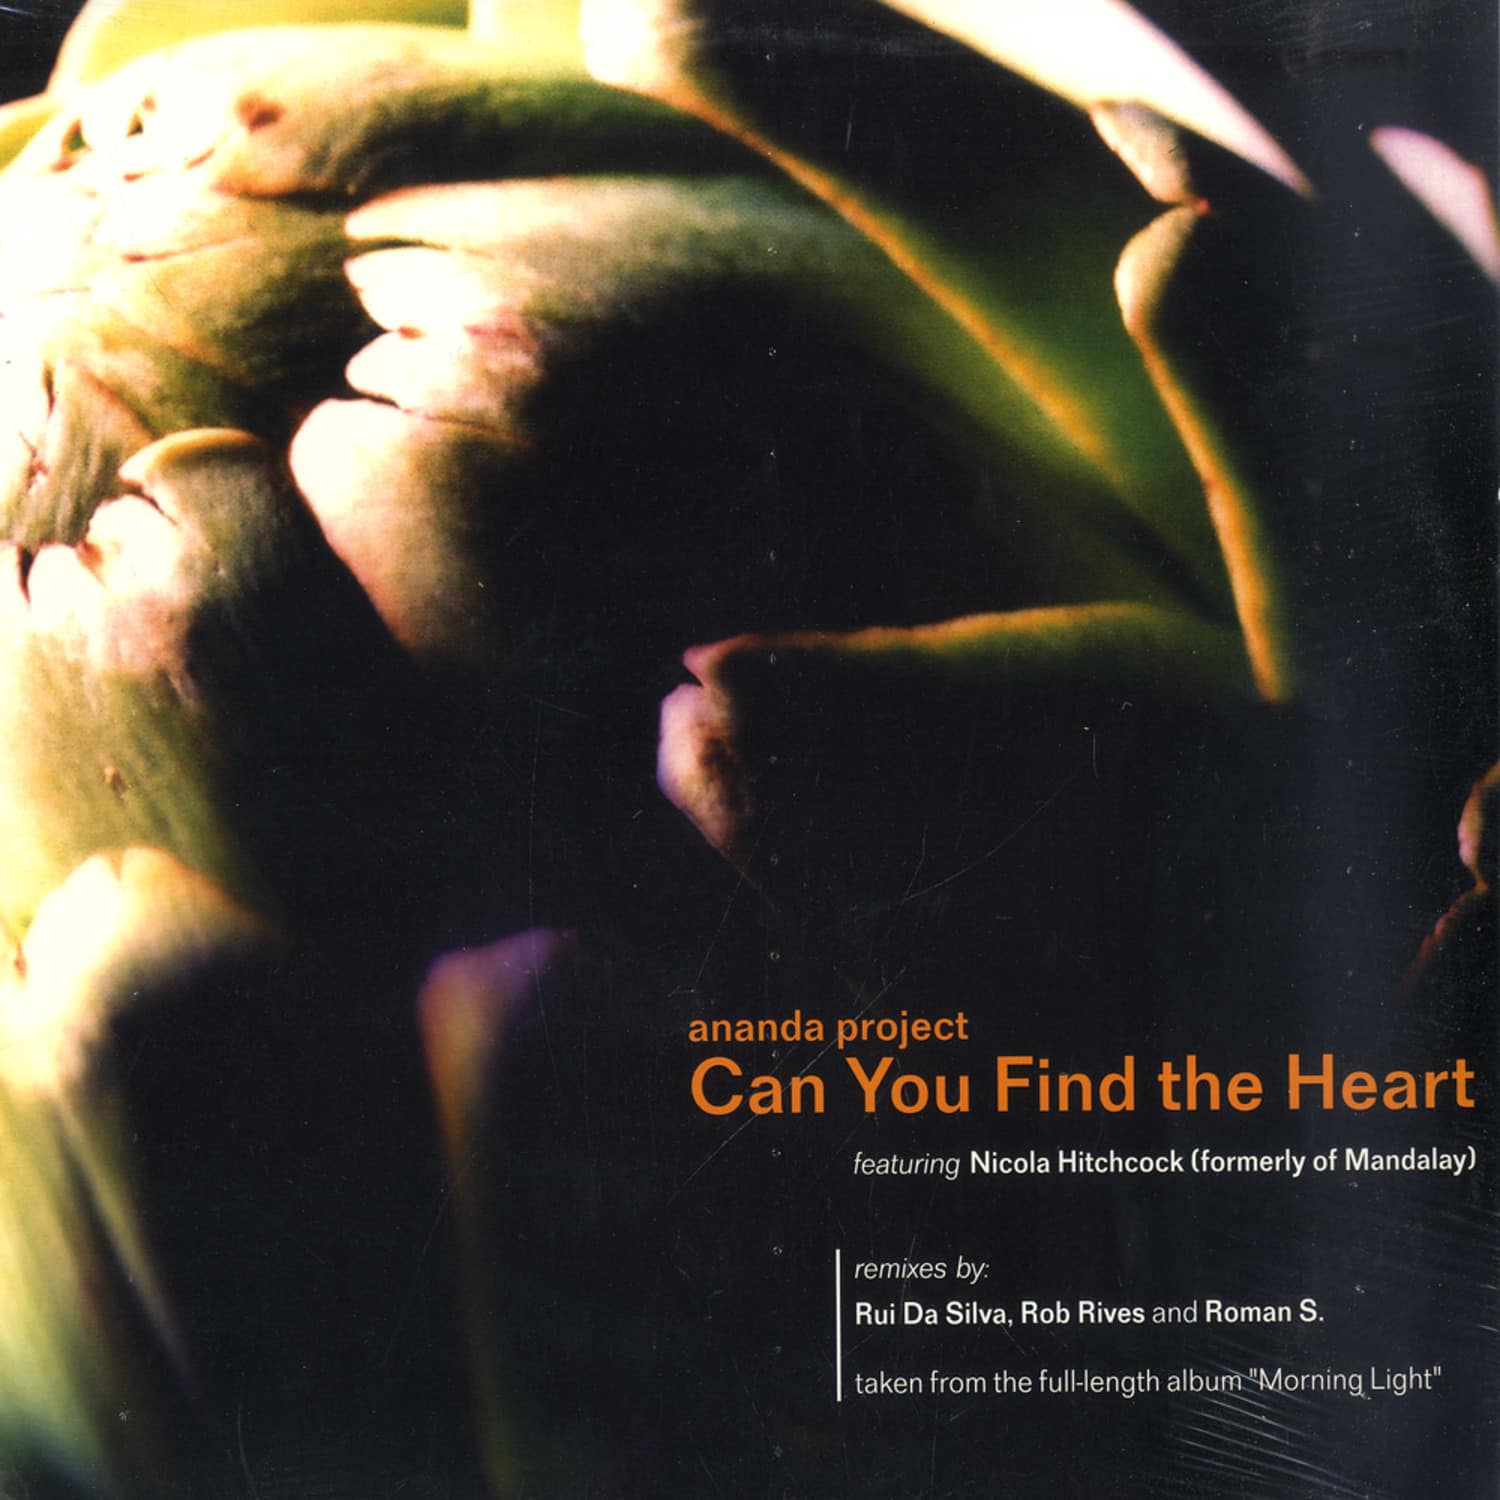 Ananada Project - CAN YOU FIND THE HEART